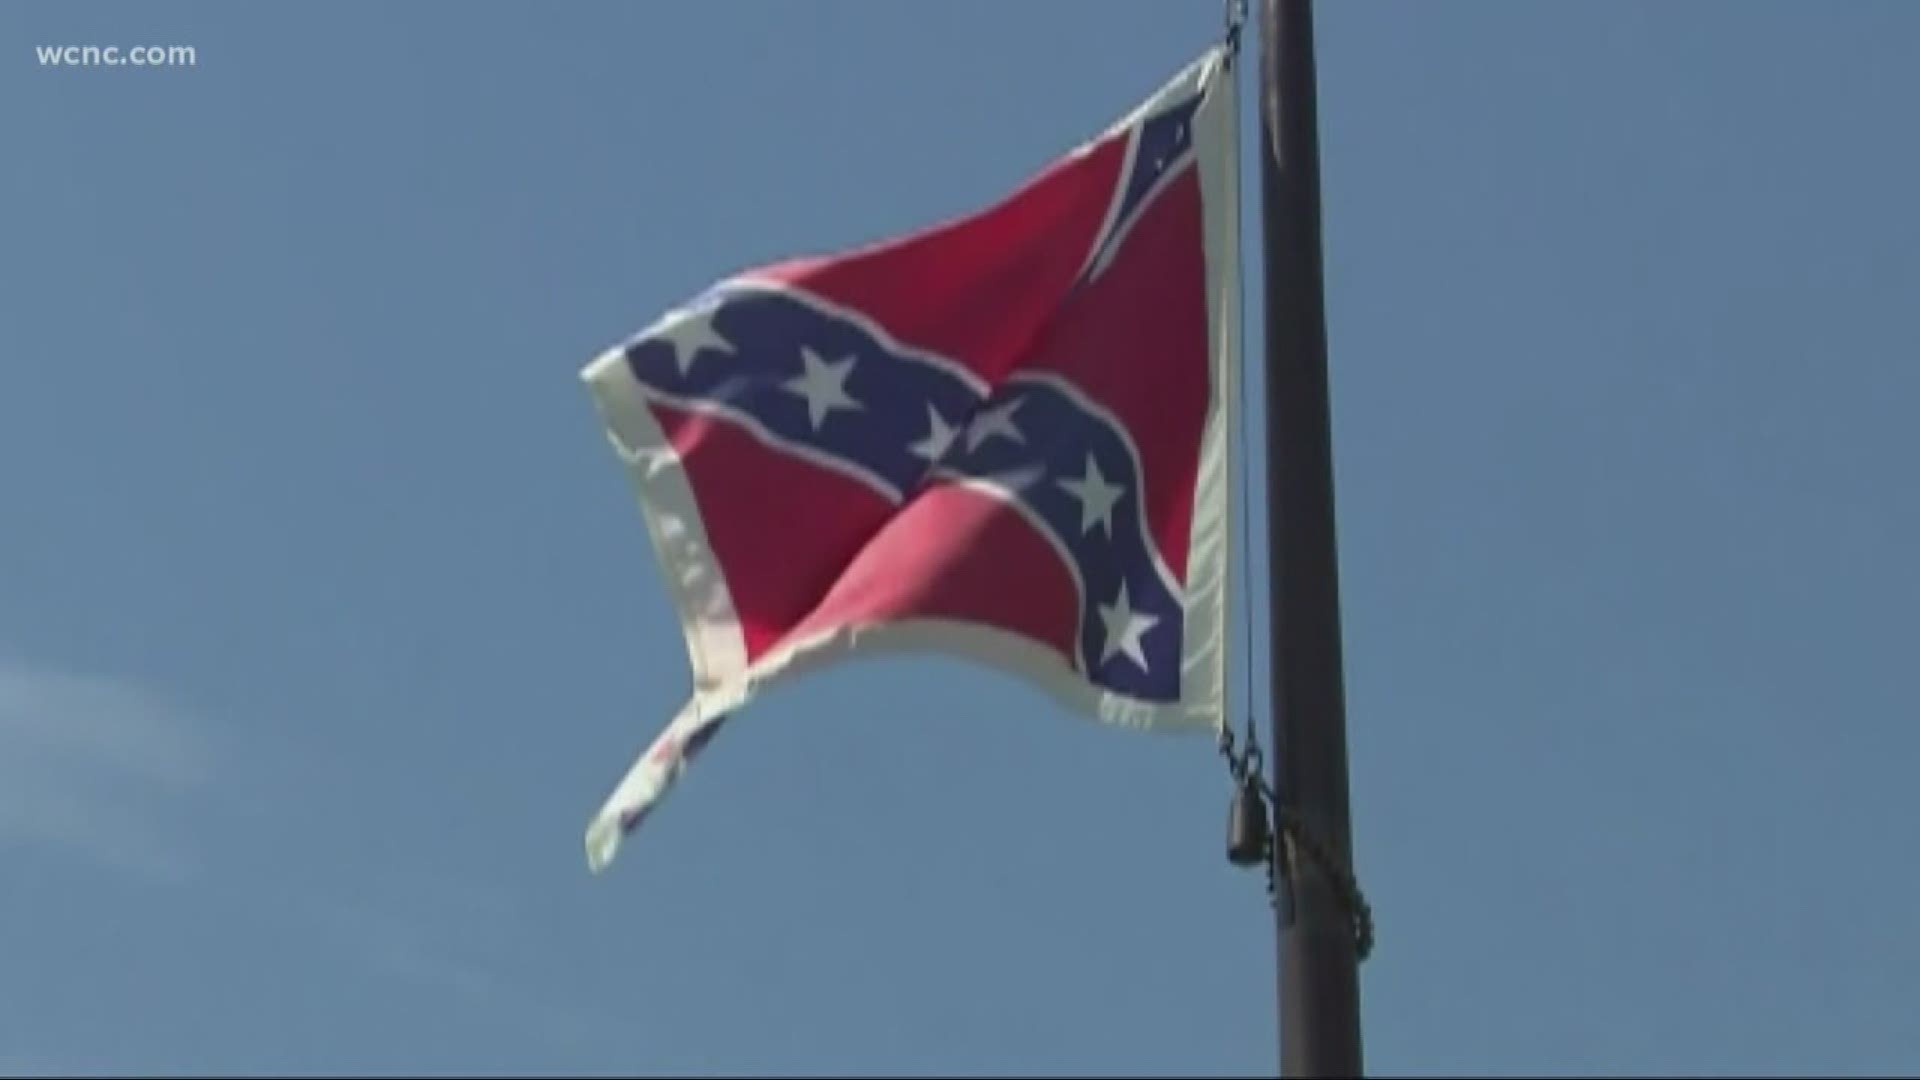 Wednesday marks four years since the Confederate flag was removed from the South Carolina State House. Supporters and opponents of the flag will gather outside the state house for the anniversary of the flag's removal.